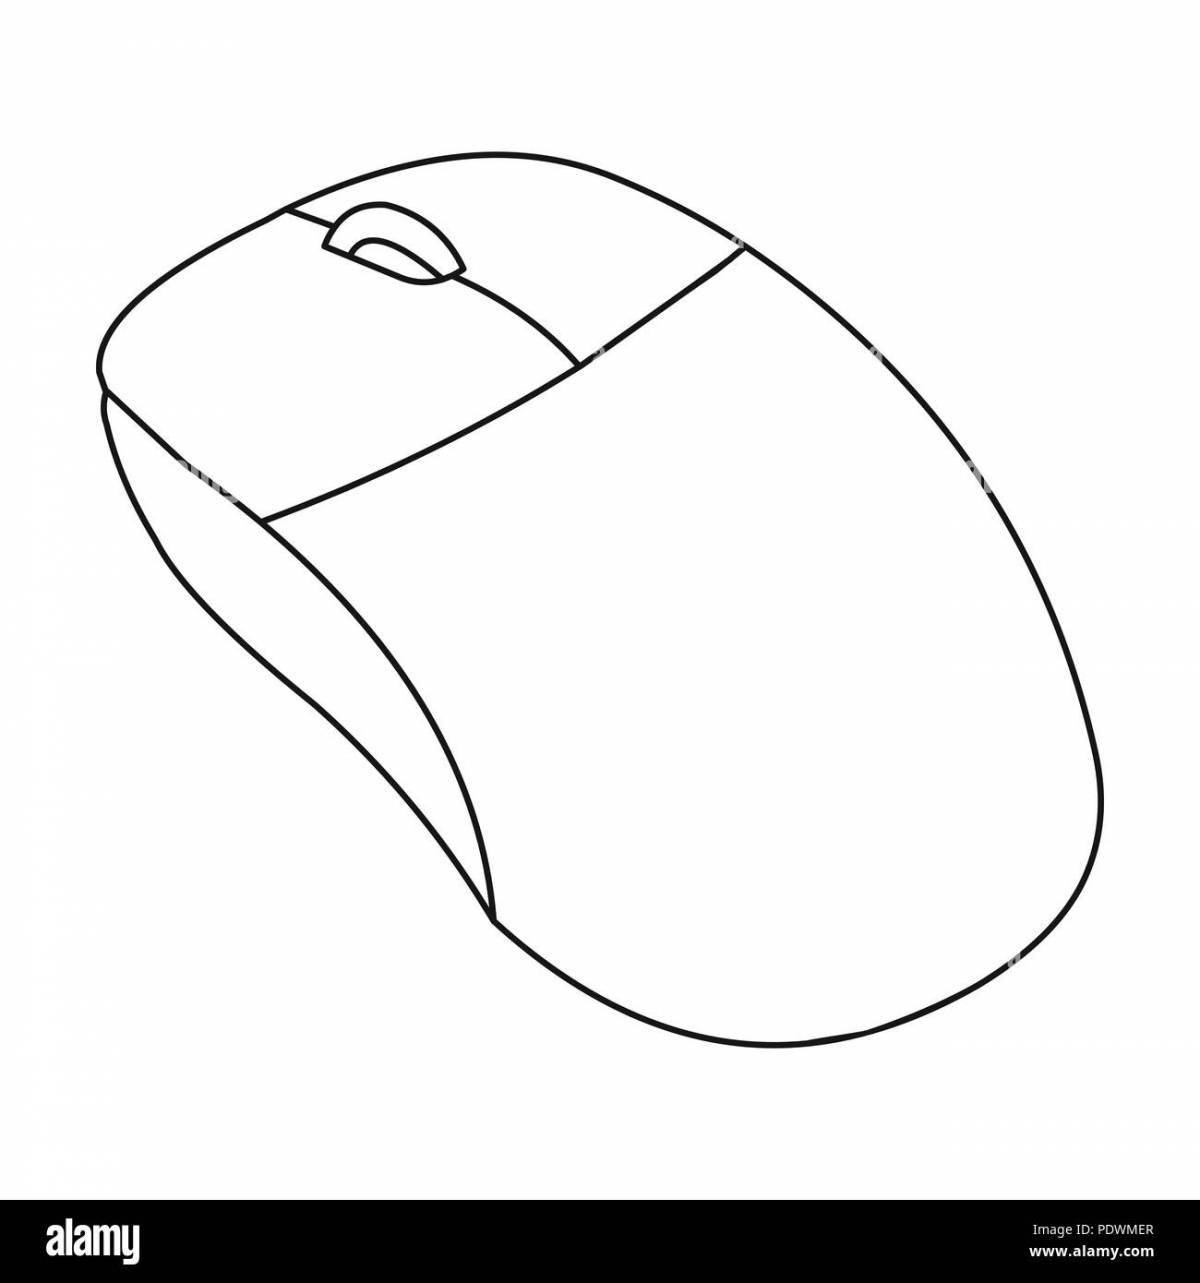 Drawing page of a joyful computer mouse